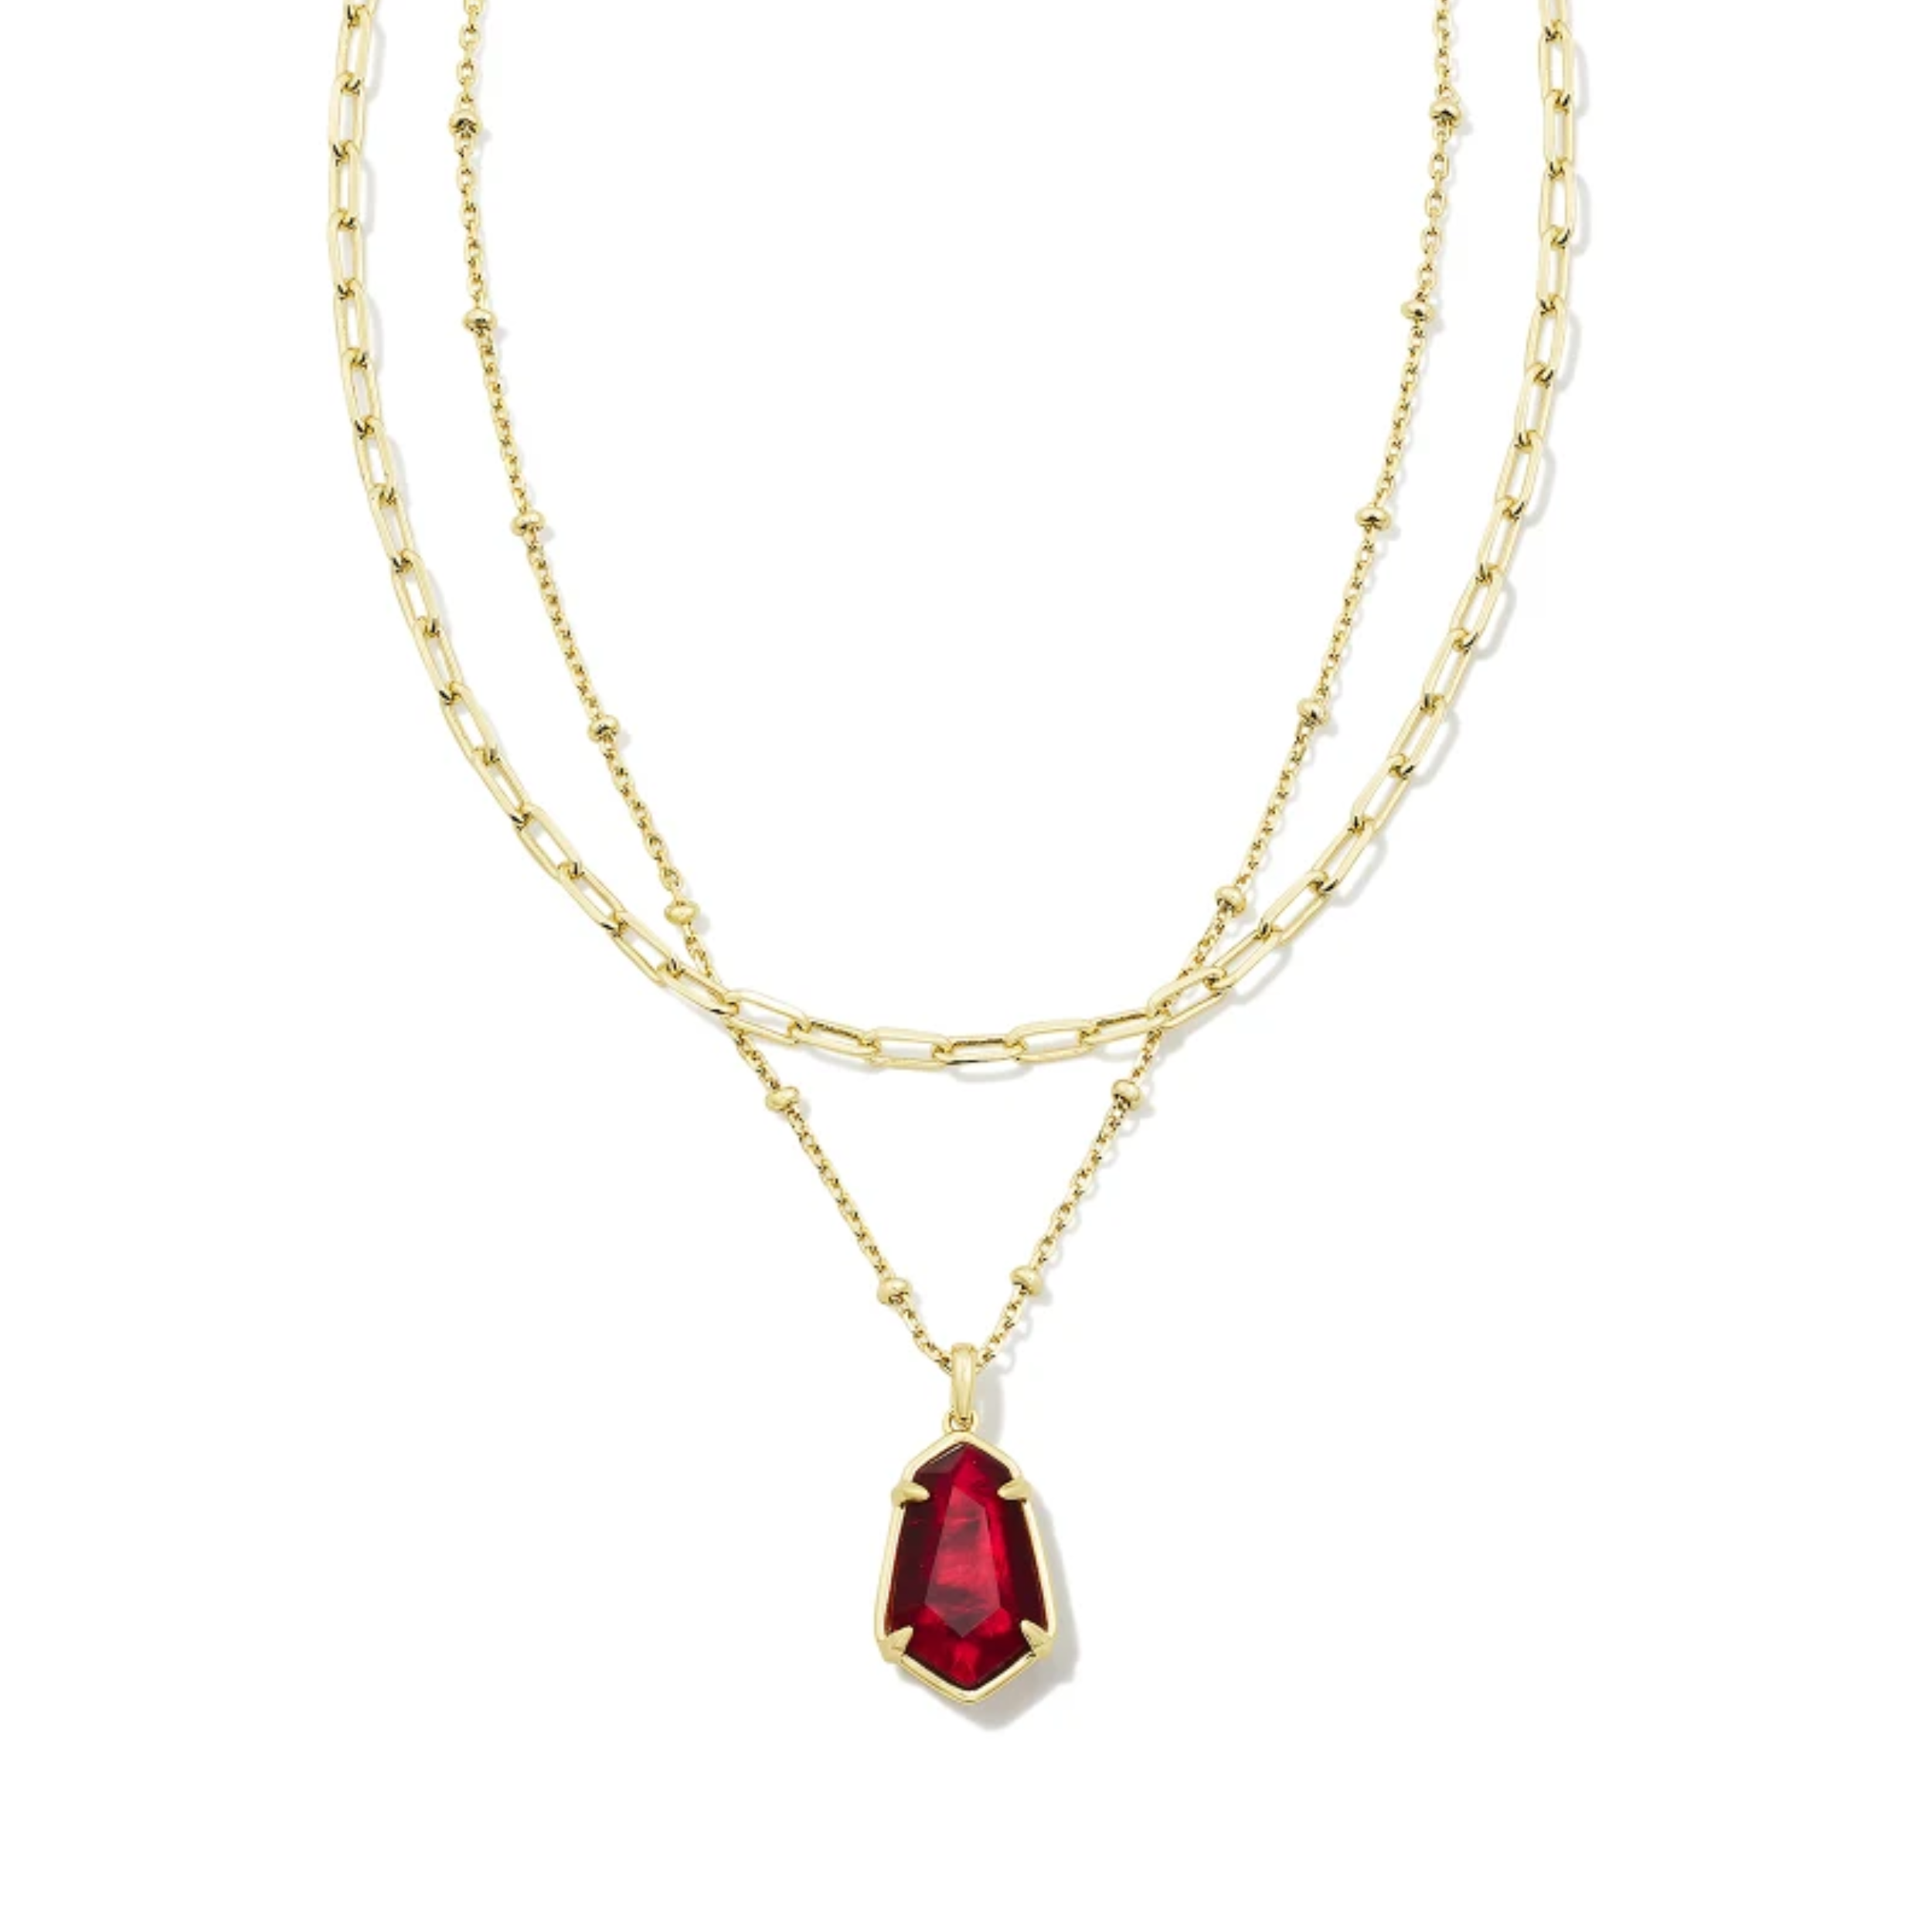 This Alexandria Gold Multi Strand Necklace in Cranberry Illusion by Kendra Scott is pictured on a white background.